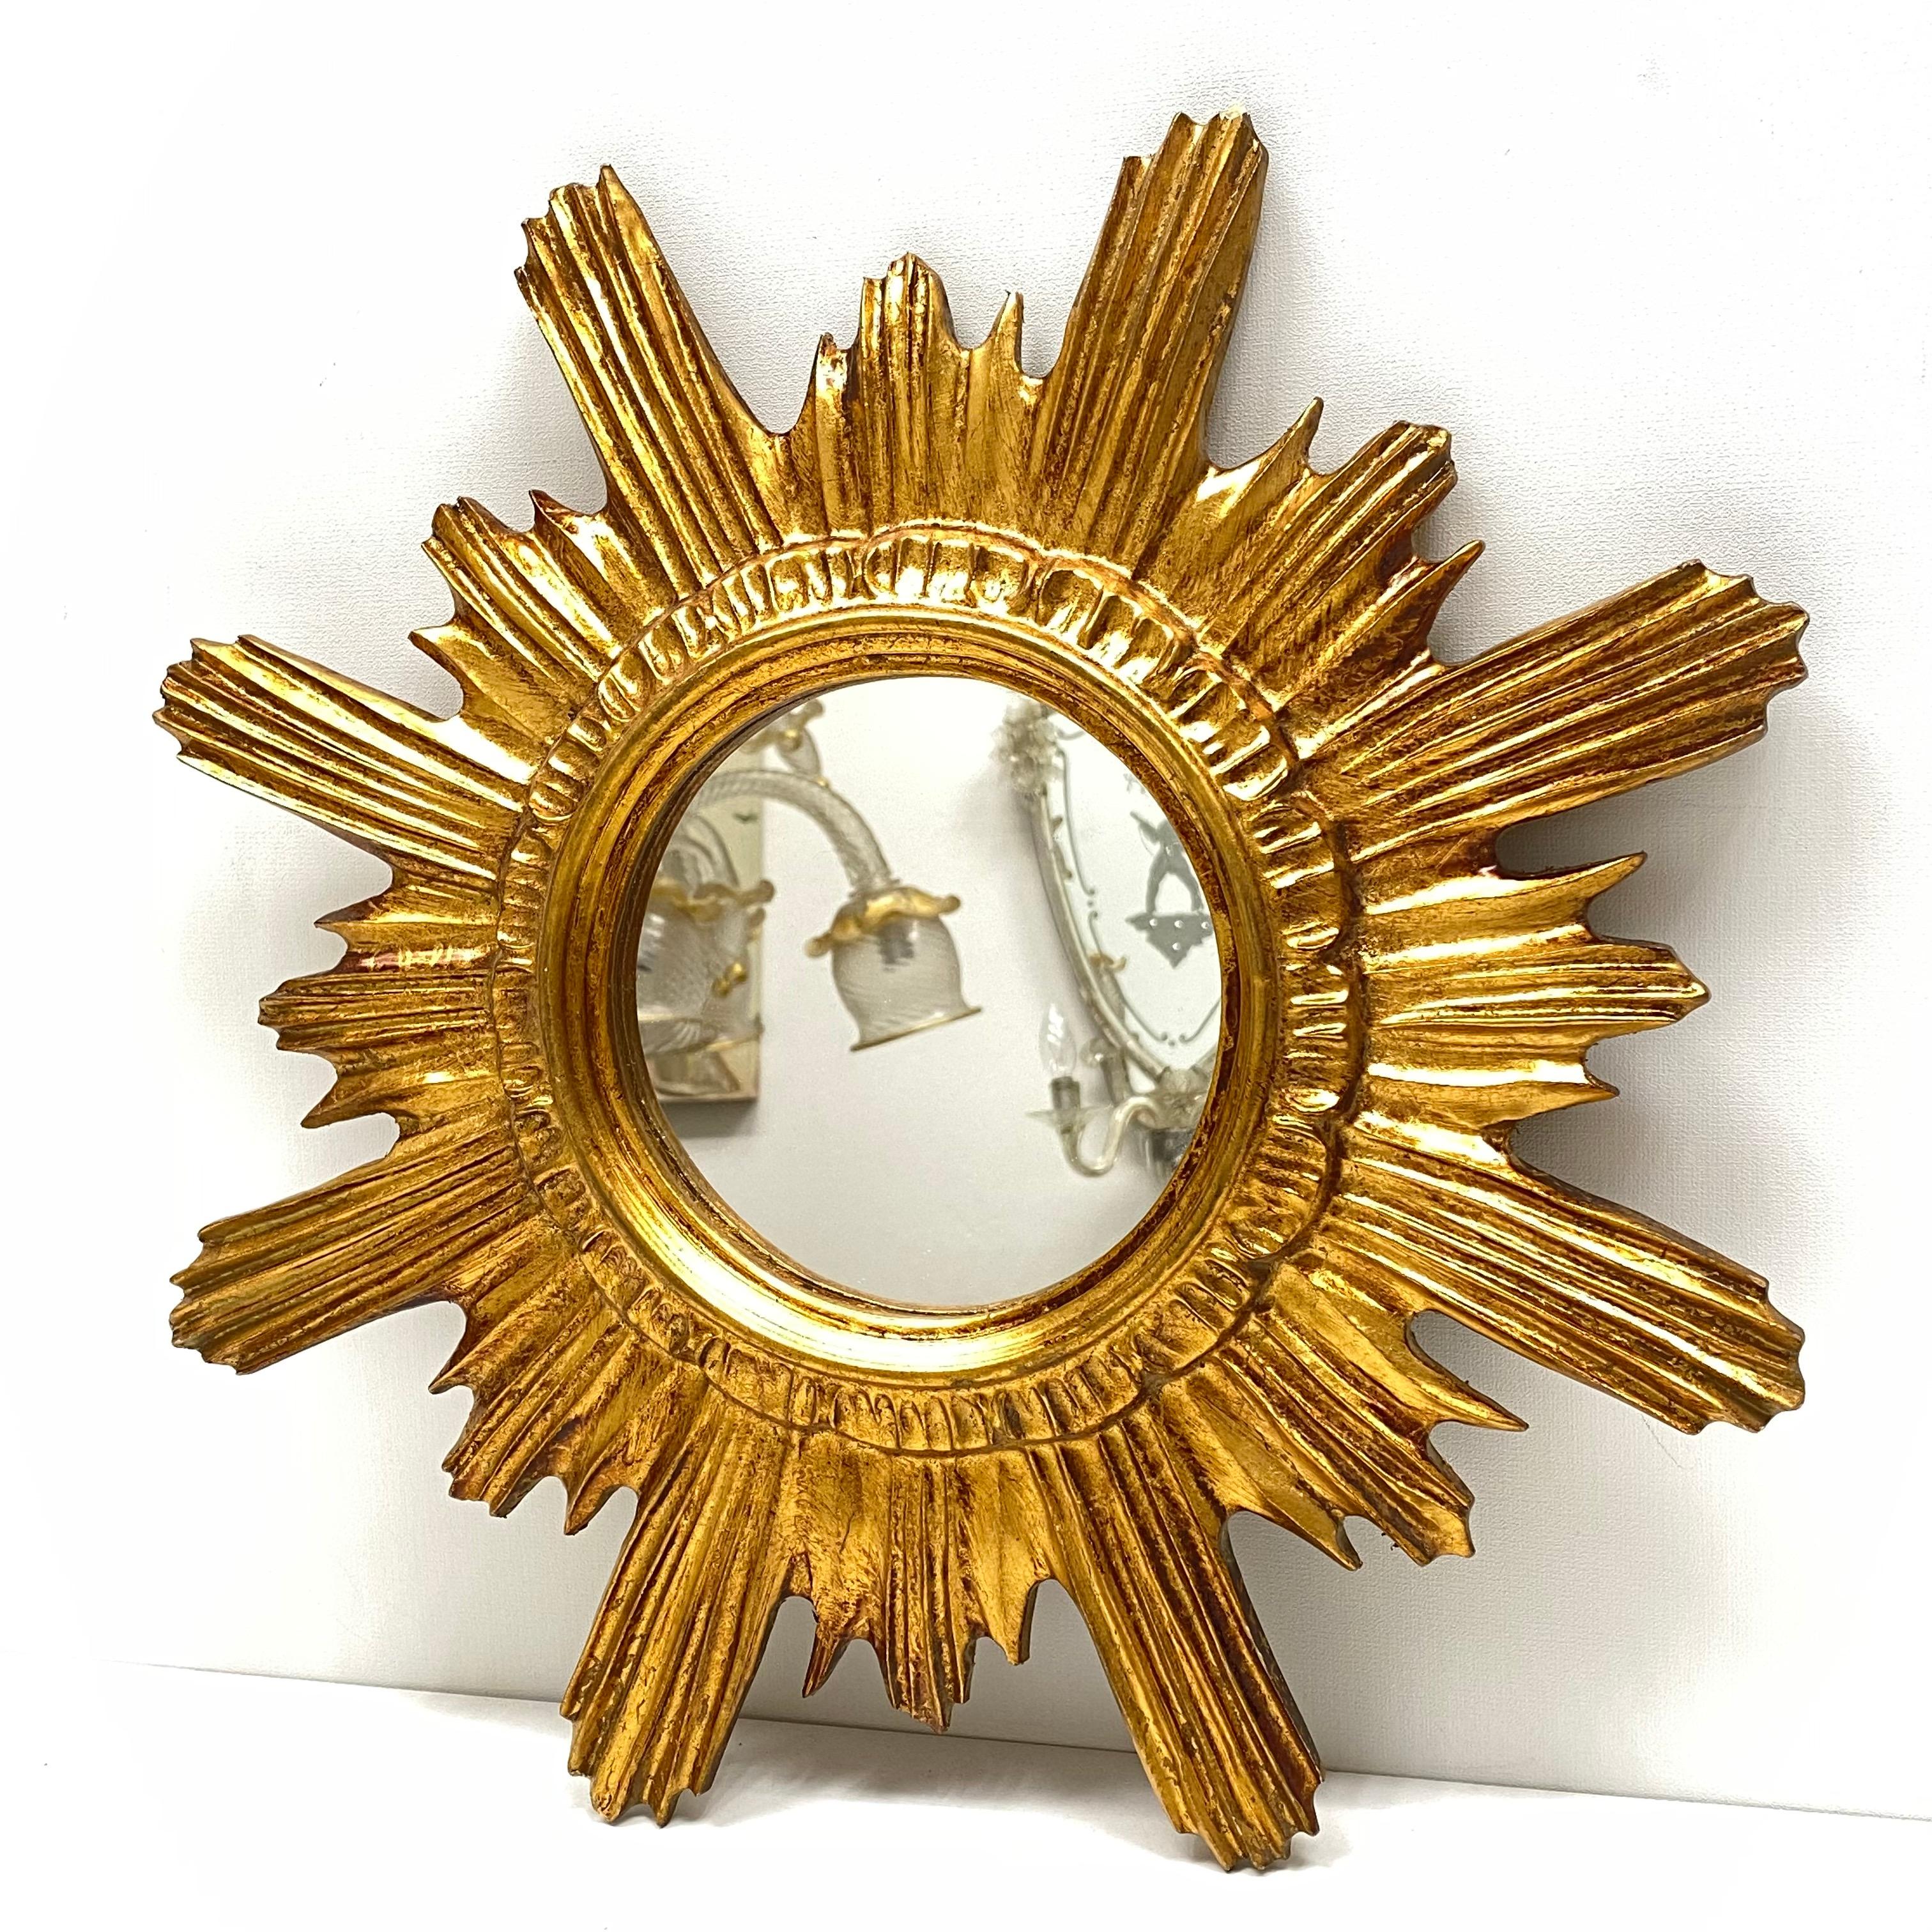 A gorgeous starburst mirror. Made of gilded wood and composition. No chips, no cracks, no repairs. It measures approximate: 16.63